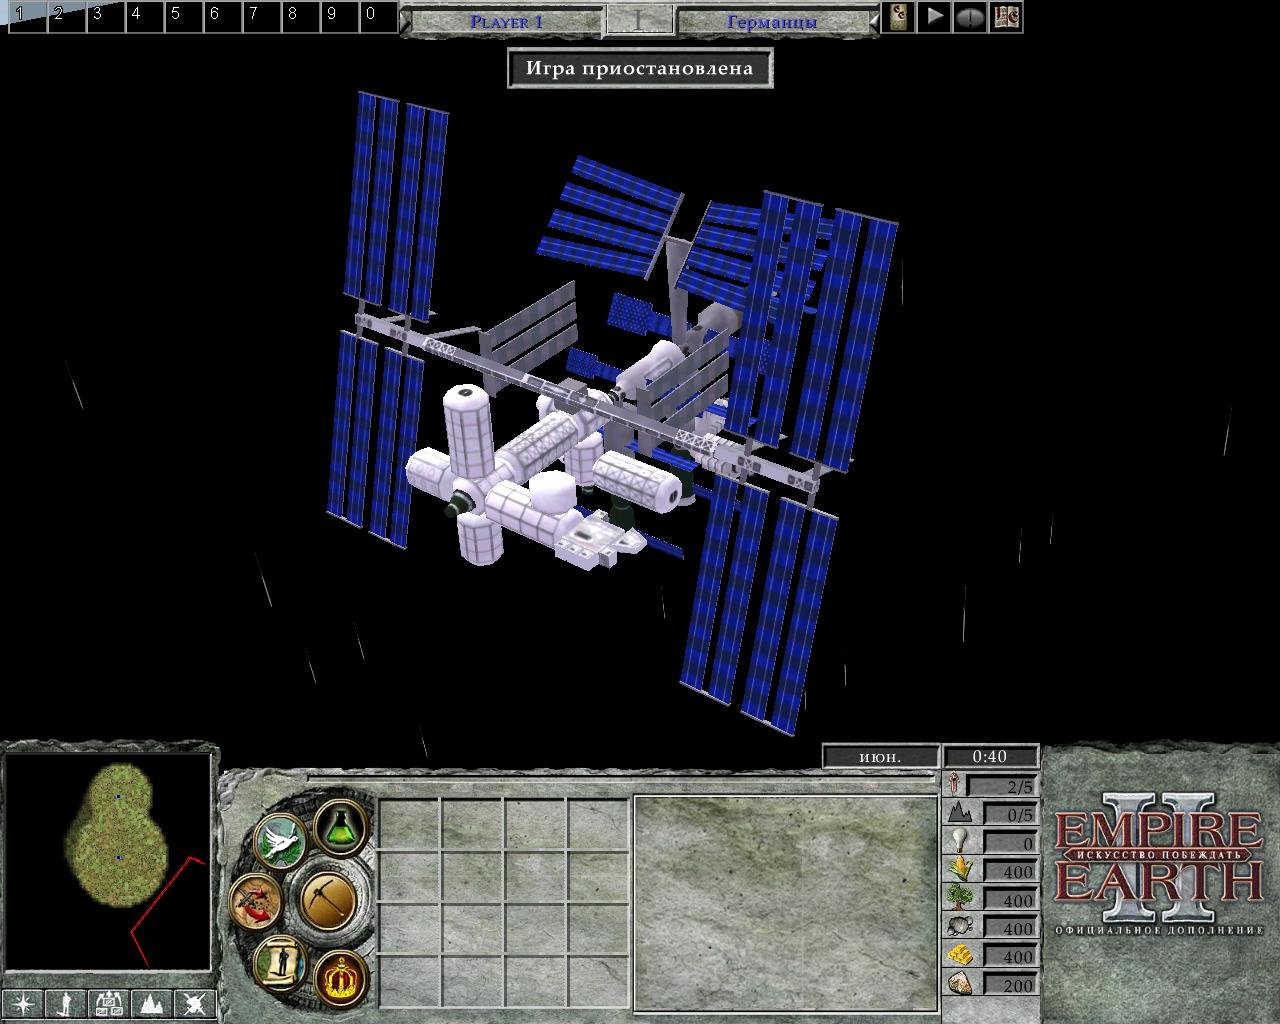 Empire earth 2 multiplayer hack